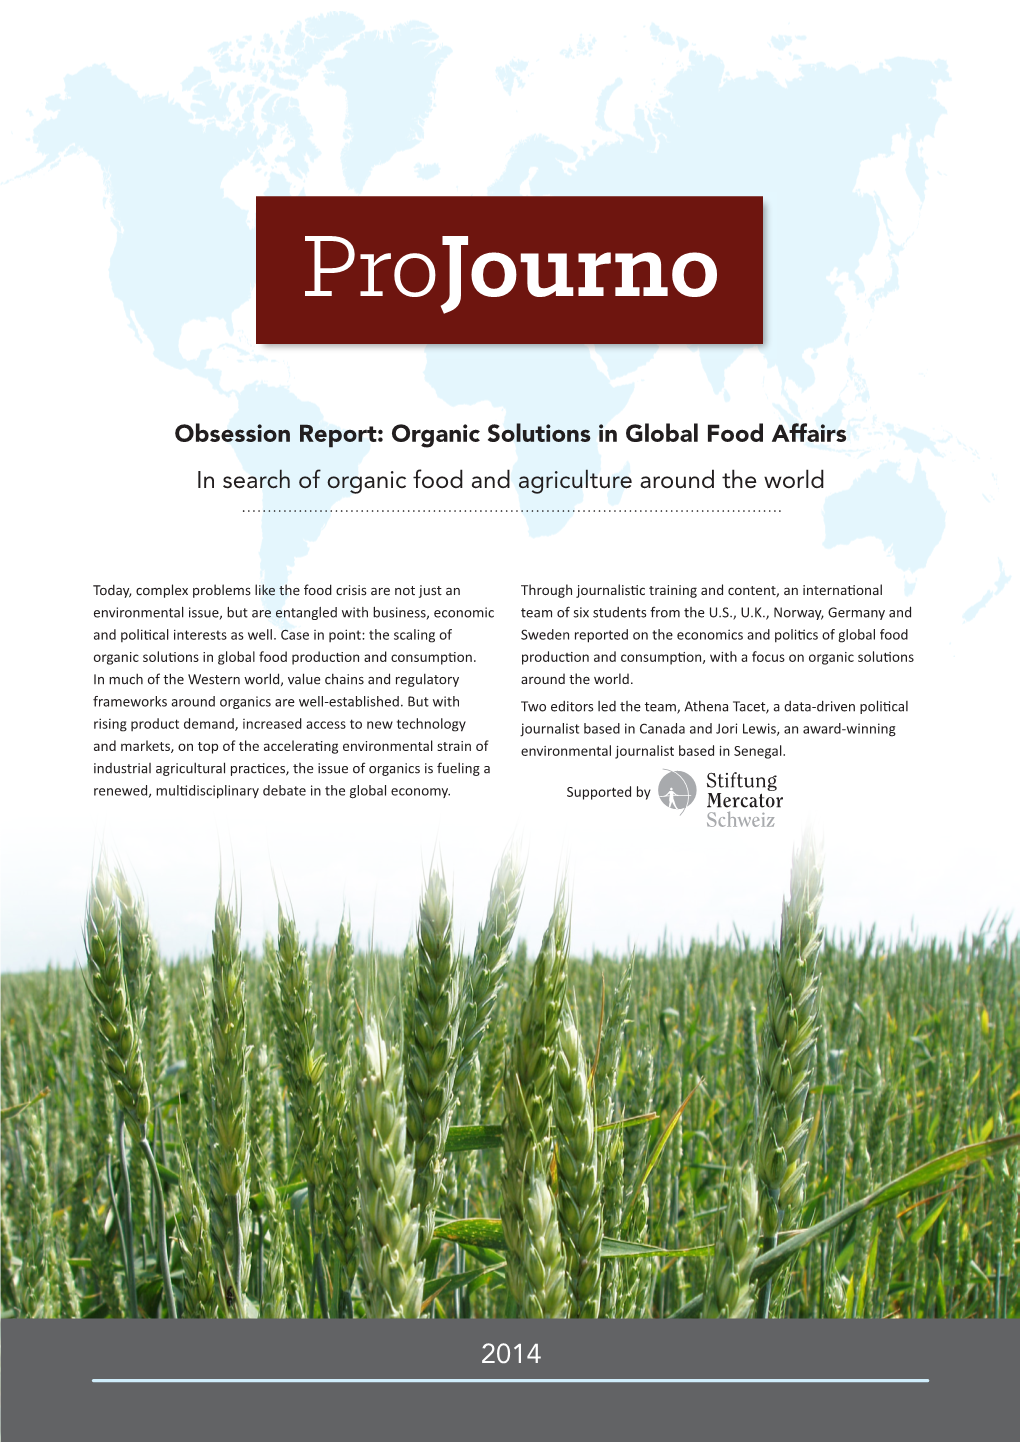 Obsession Report: Organic Solutions in Global Food Affairs in Search of Organic Food and Agriculture Around the World